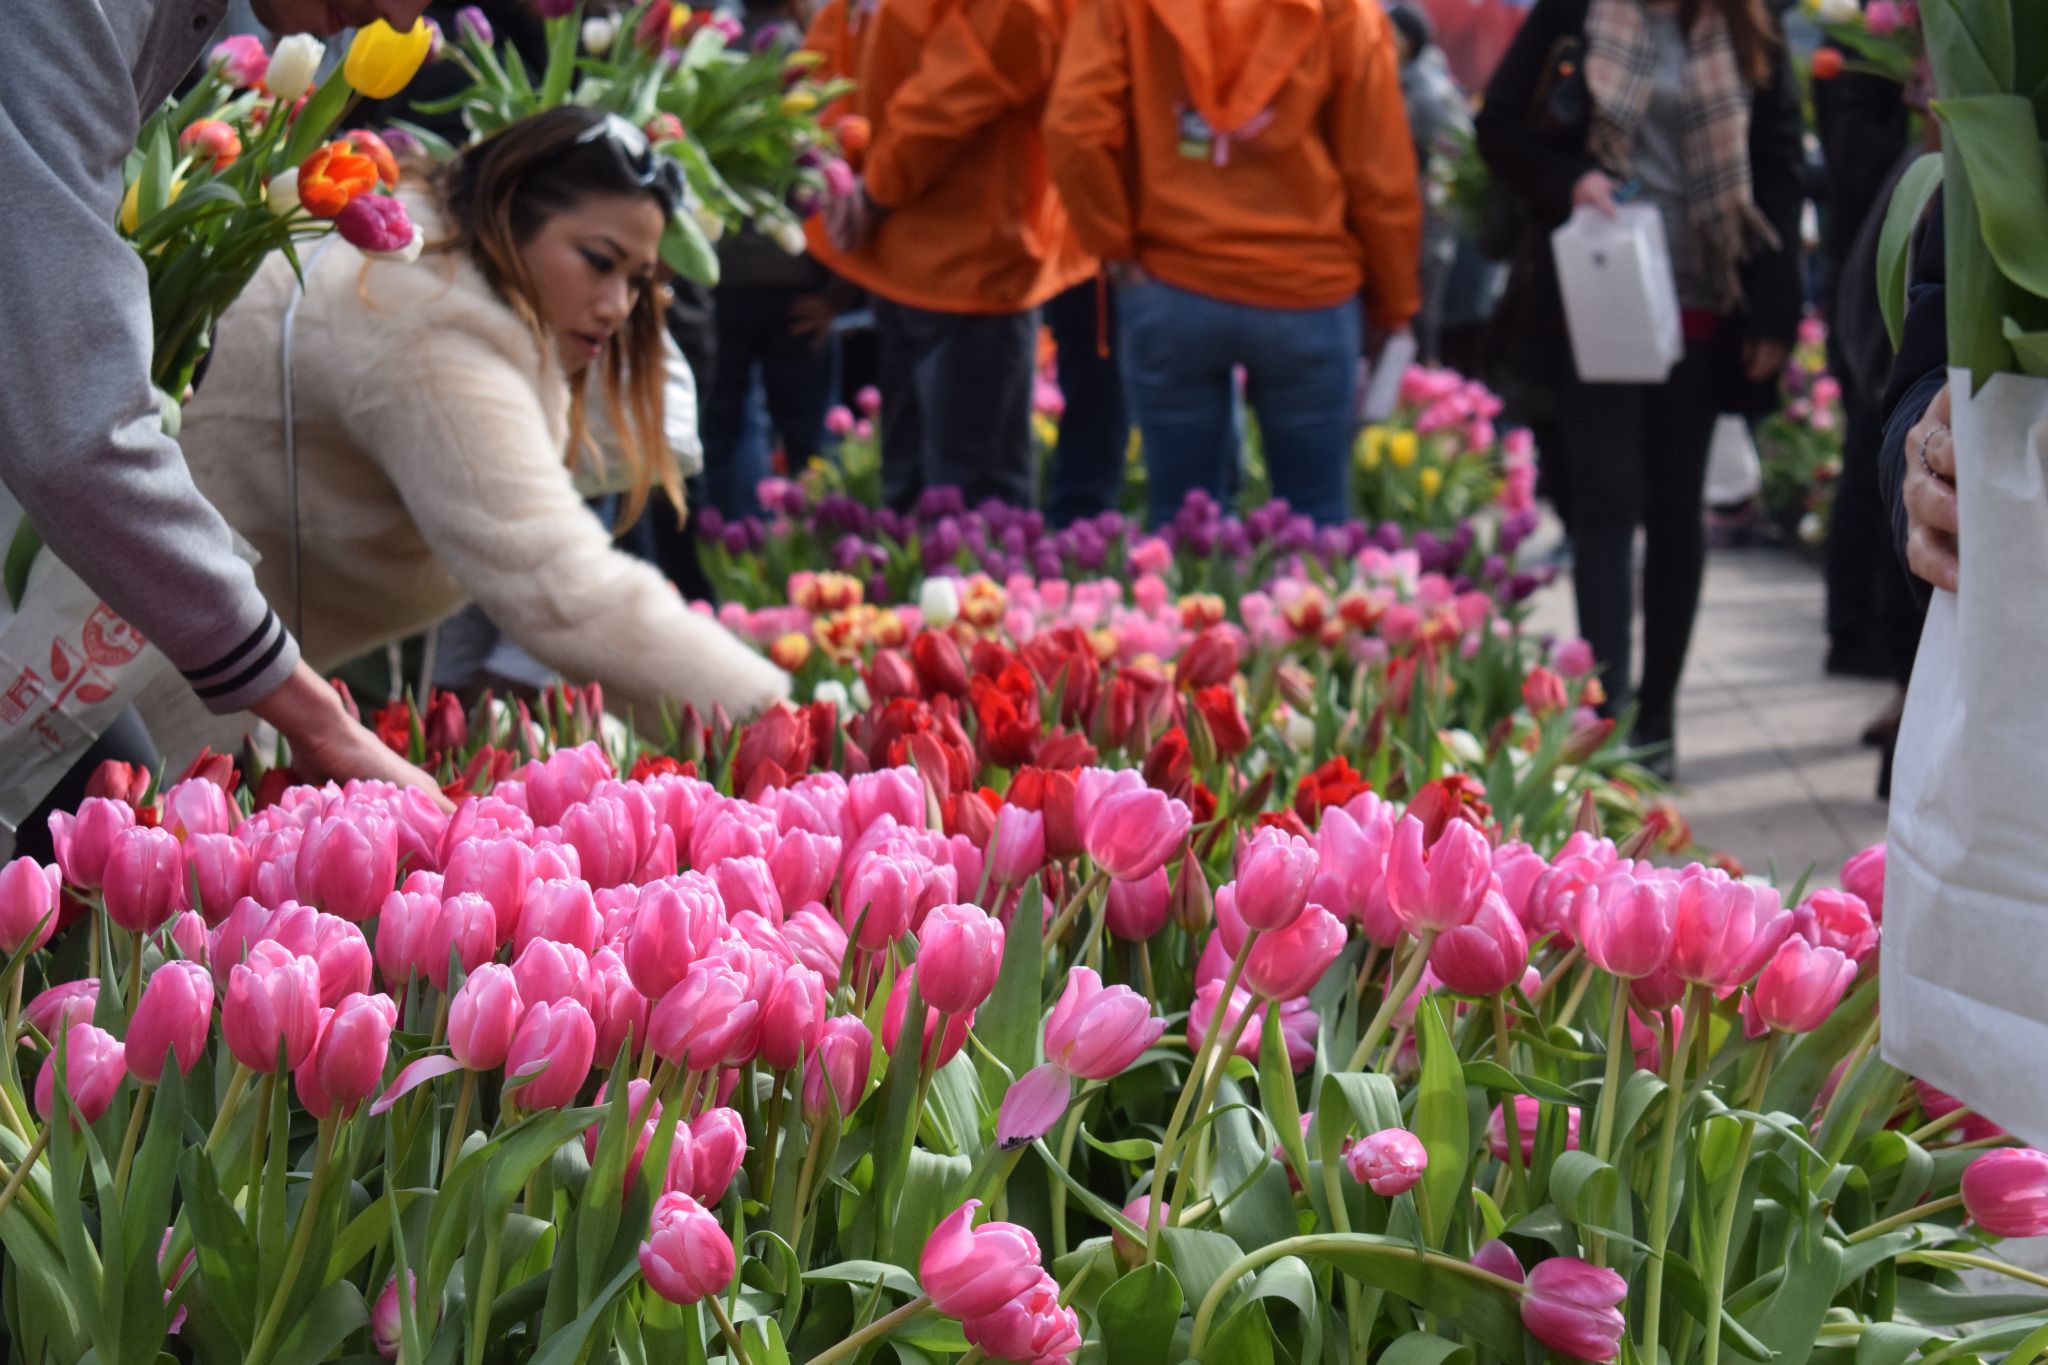 See Union Square transformed into a garden of 100,000 tulips